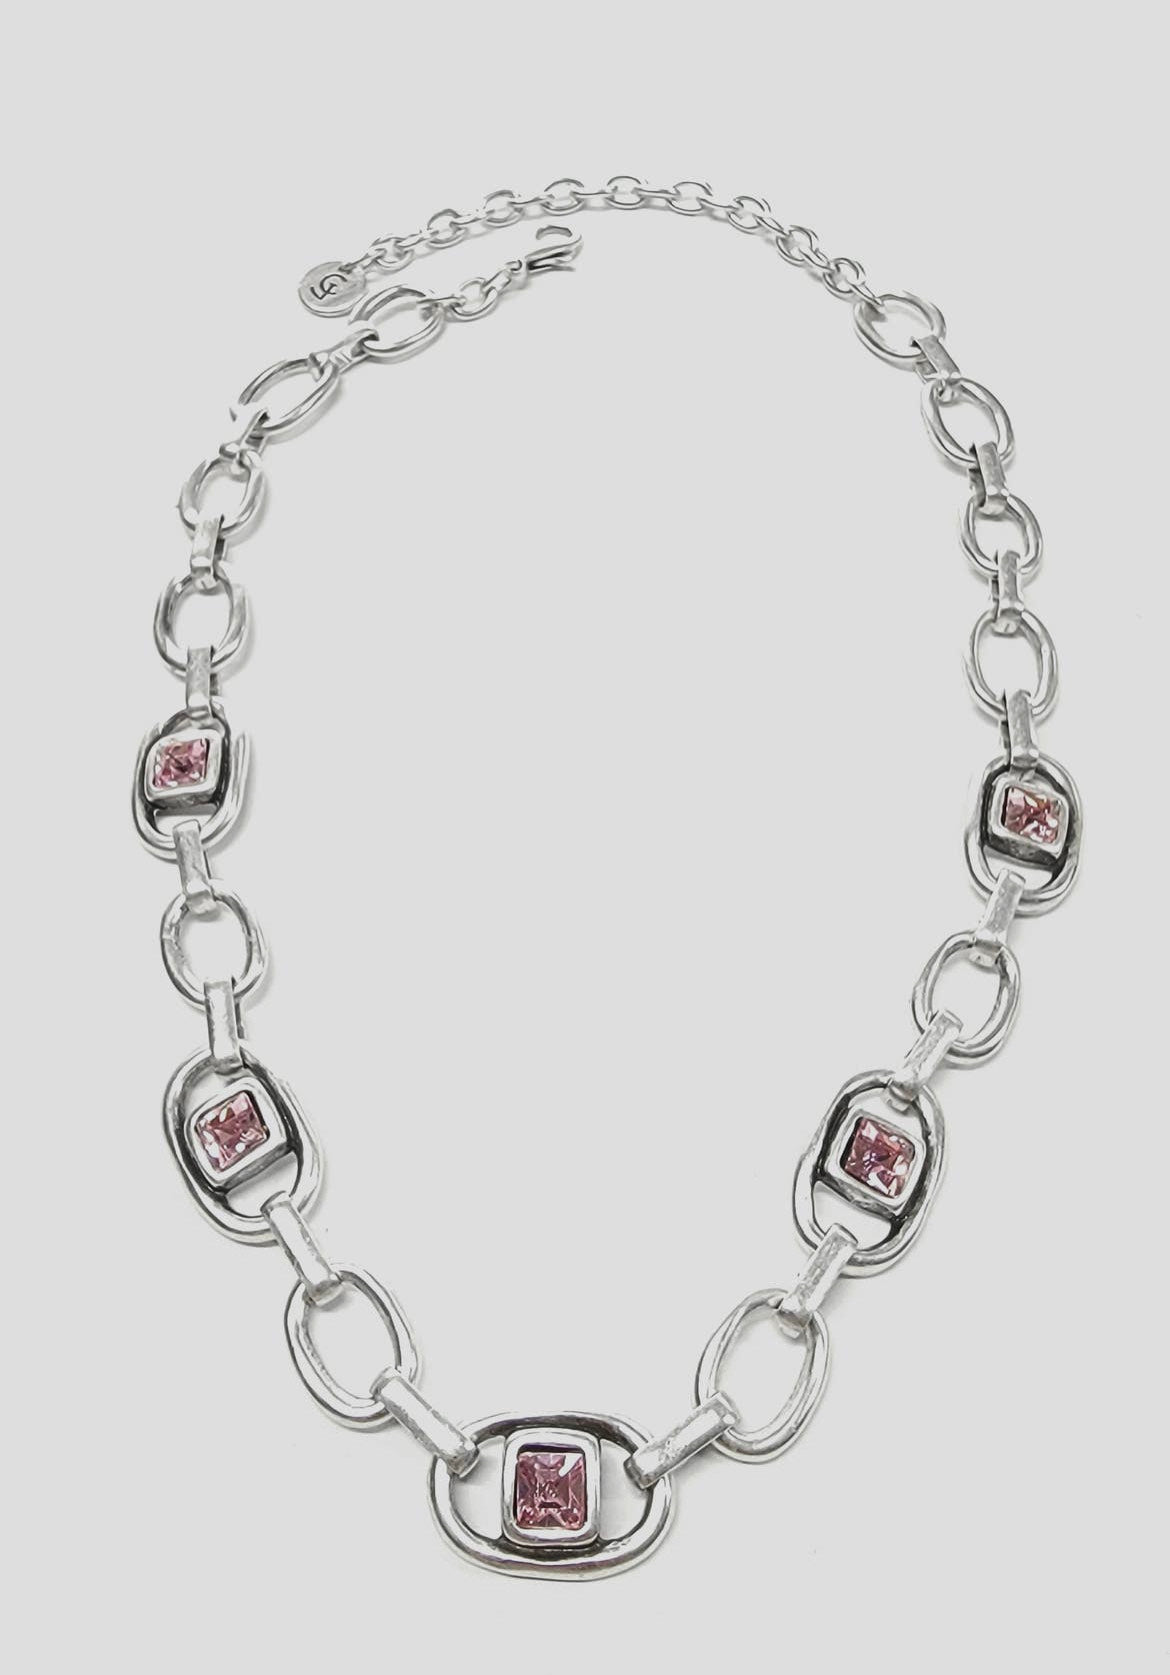 CHANOUR Handmade Pink Crystal Pewter Necklace